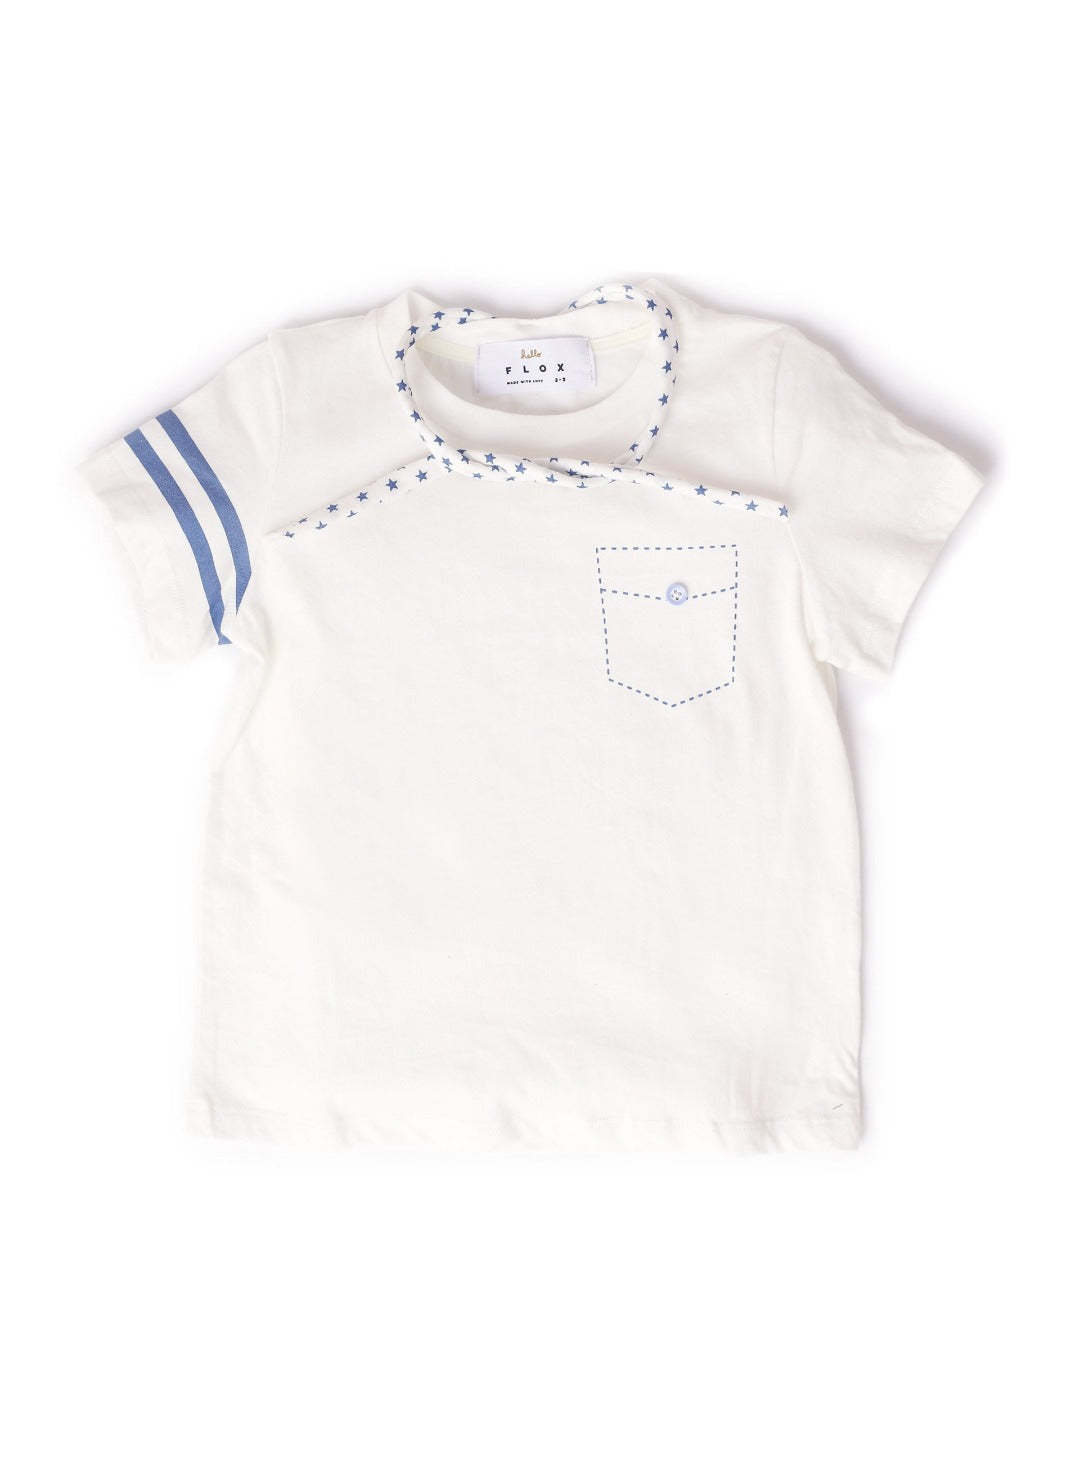 milk white t-shirt with detachable string tie